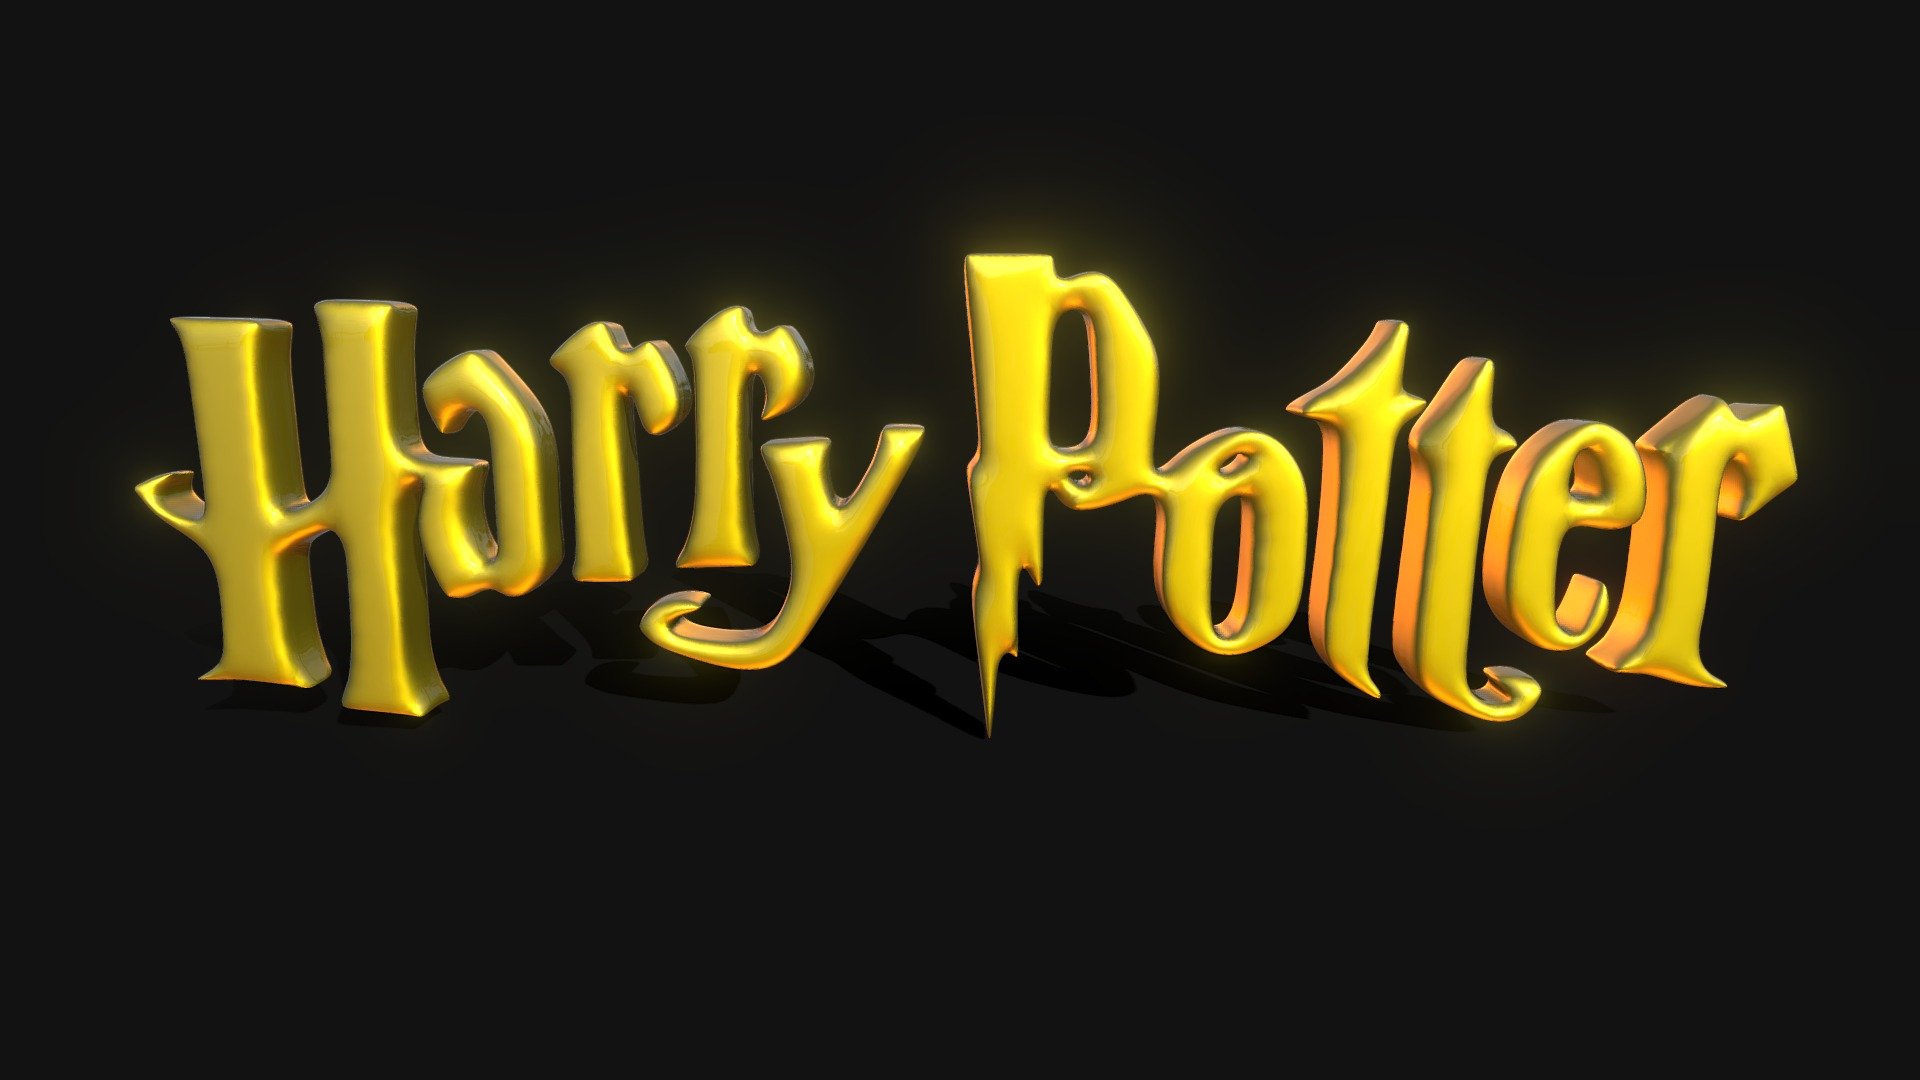 The Harry Potter logo is a distinctive and iconic symbol that represents the beloved fantasy series created by J.K. Rowling. The logo features the words &ldquo;Harry Potter